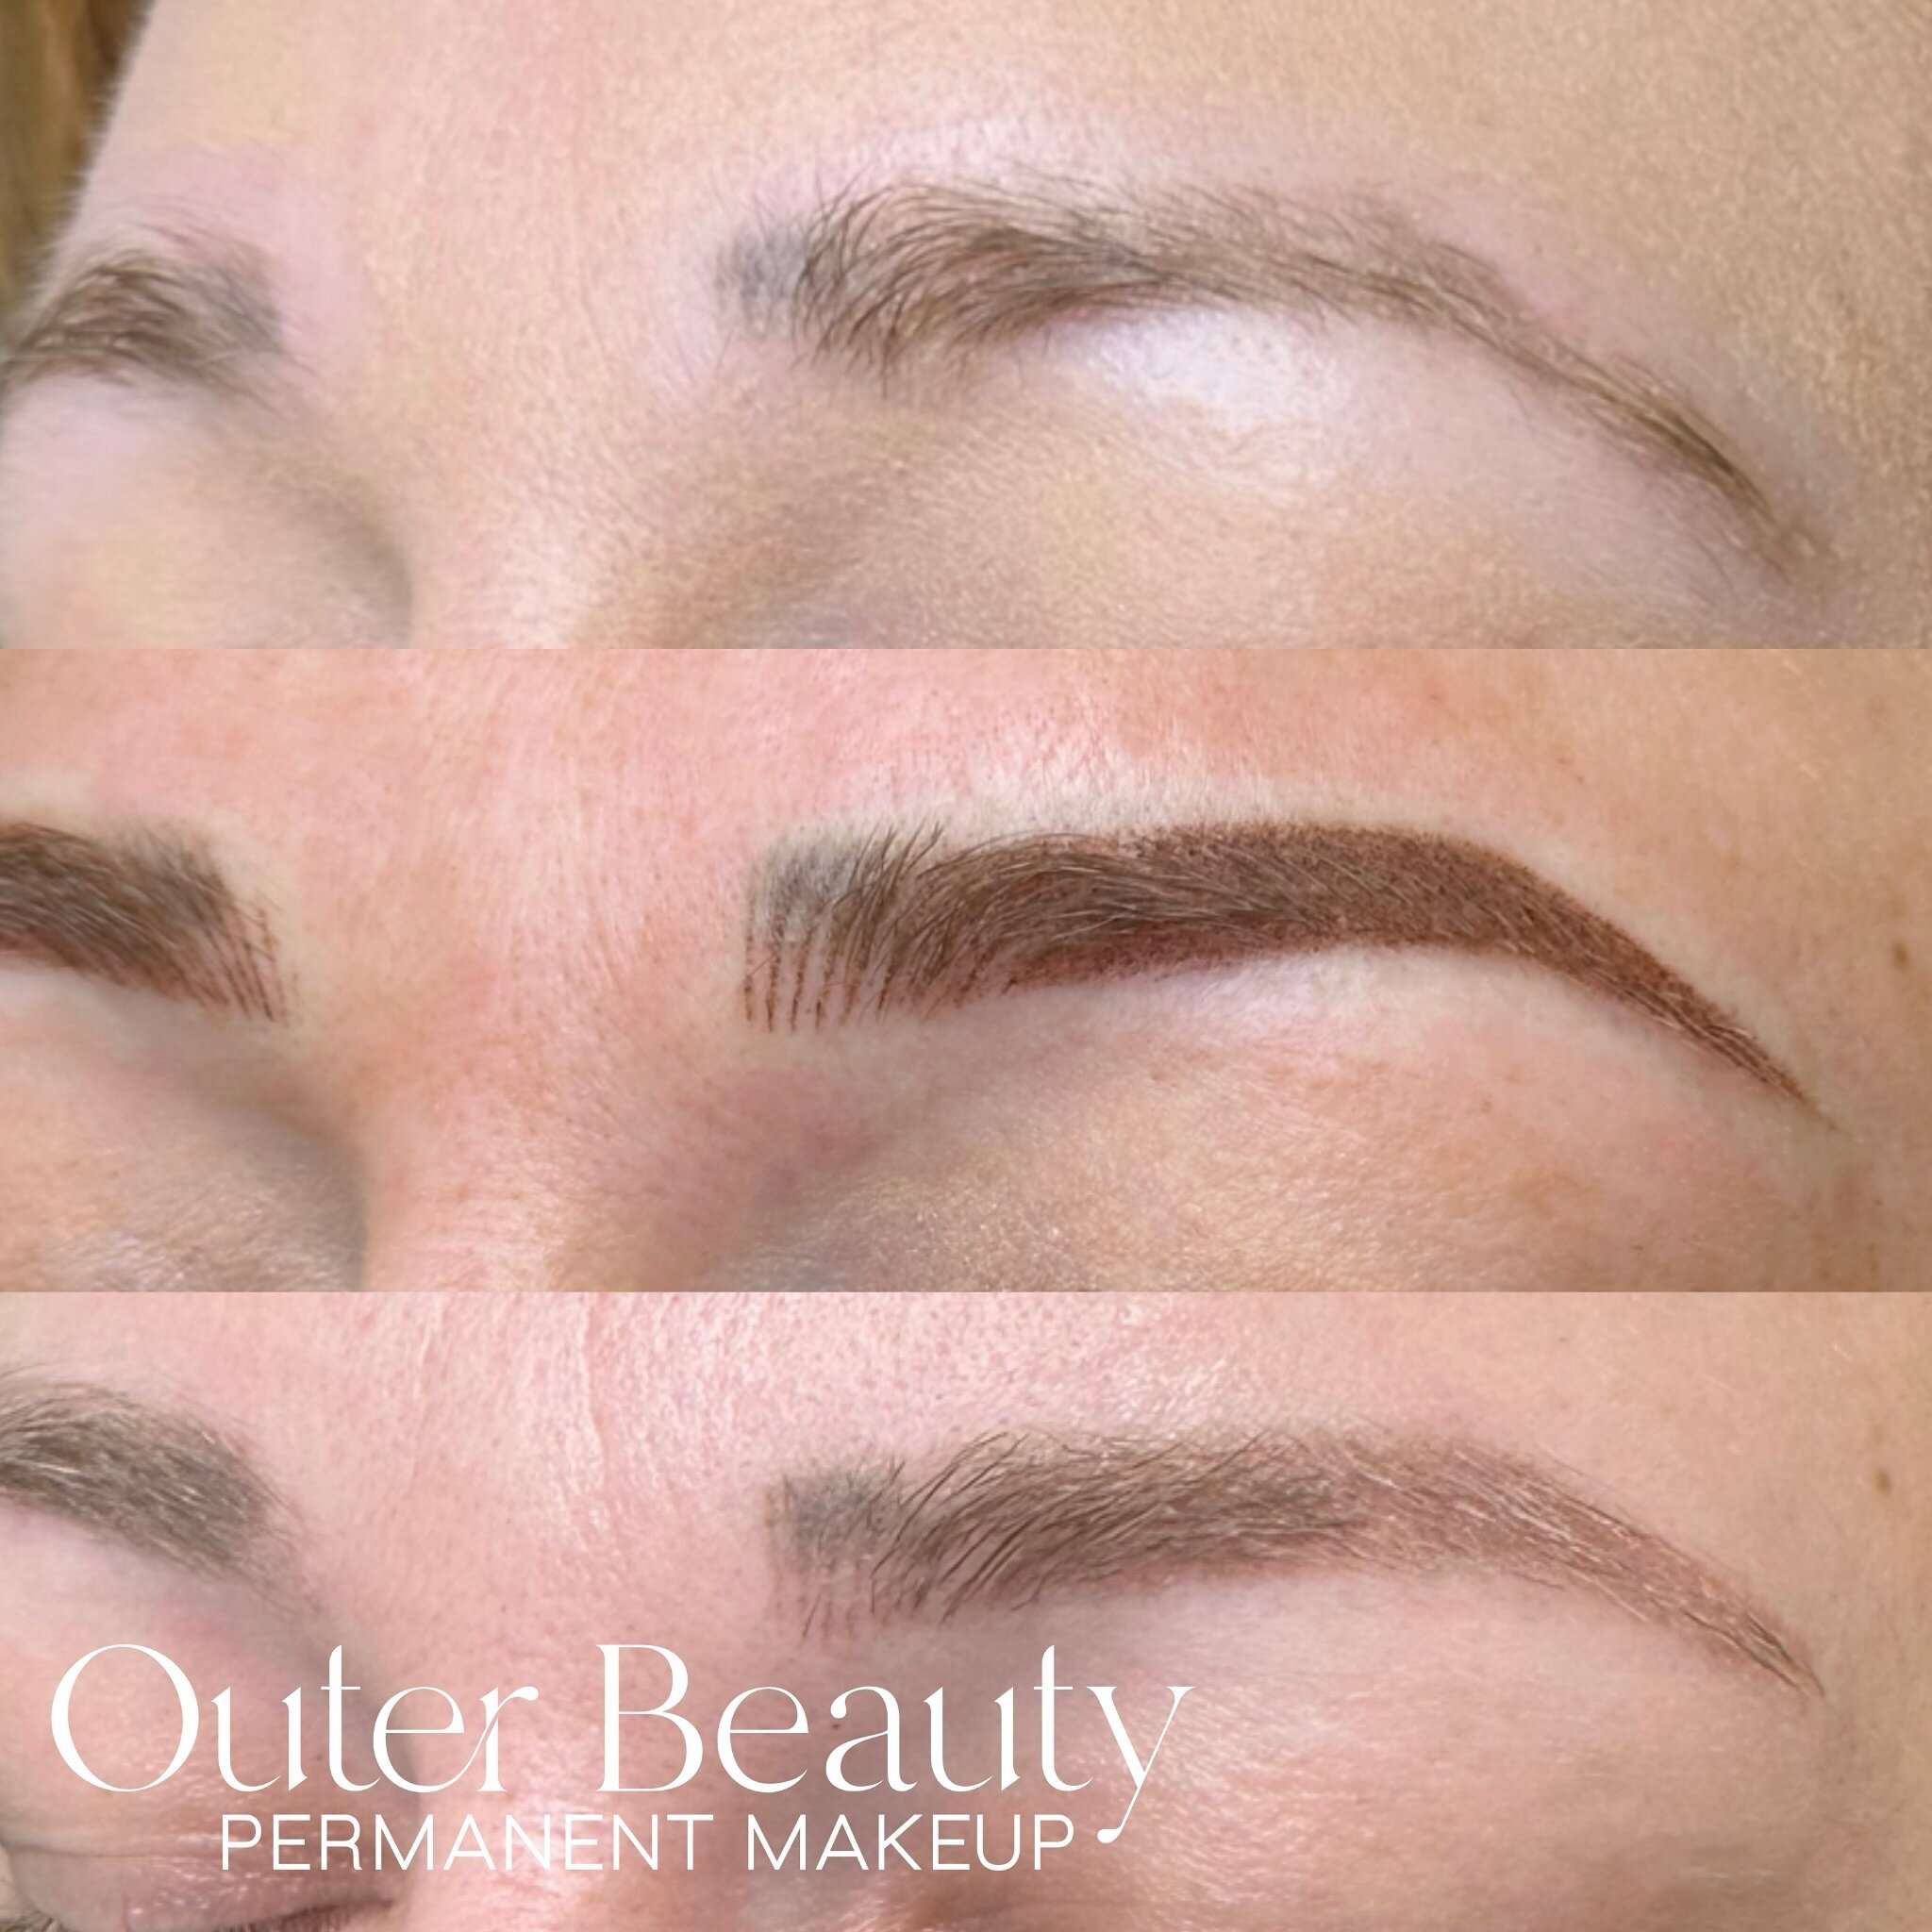 Combo brow cover up healed before touch up!! Look at that non surgical brow lift 😍 April is filling up quickly so book your appointment today! 

#minneapolisbrows #minneapolis #minnesota #minneapolispmu #minneapolismicroblading #minneapolistattoo #m